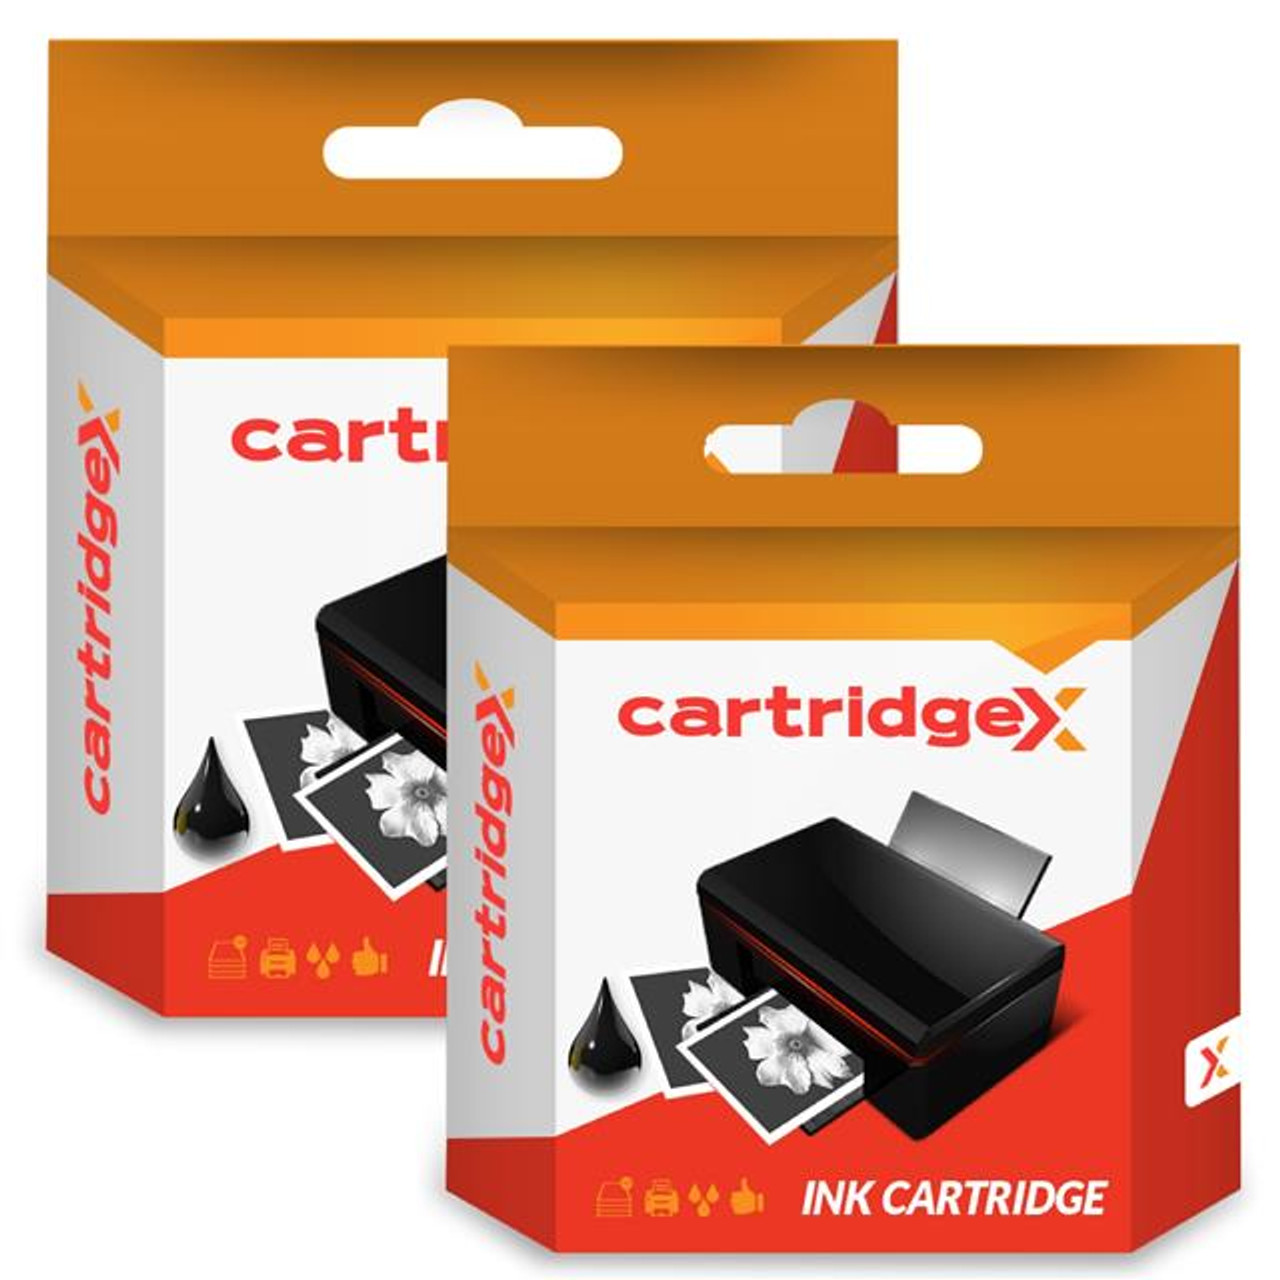 Compatible 2 X Black Ink Cartridge For Canon Pixma Ip3600 Ip4600 Ip4700 Cli-521 Bk